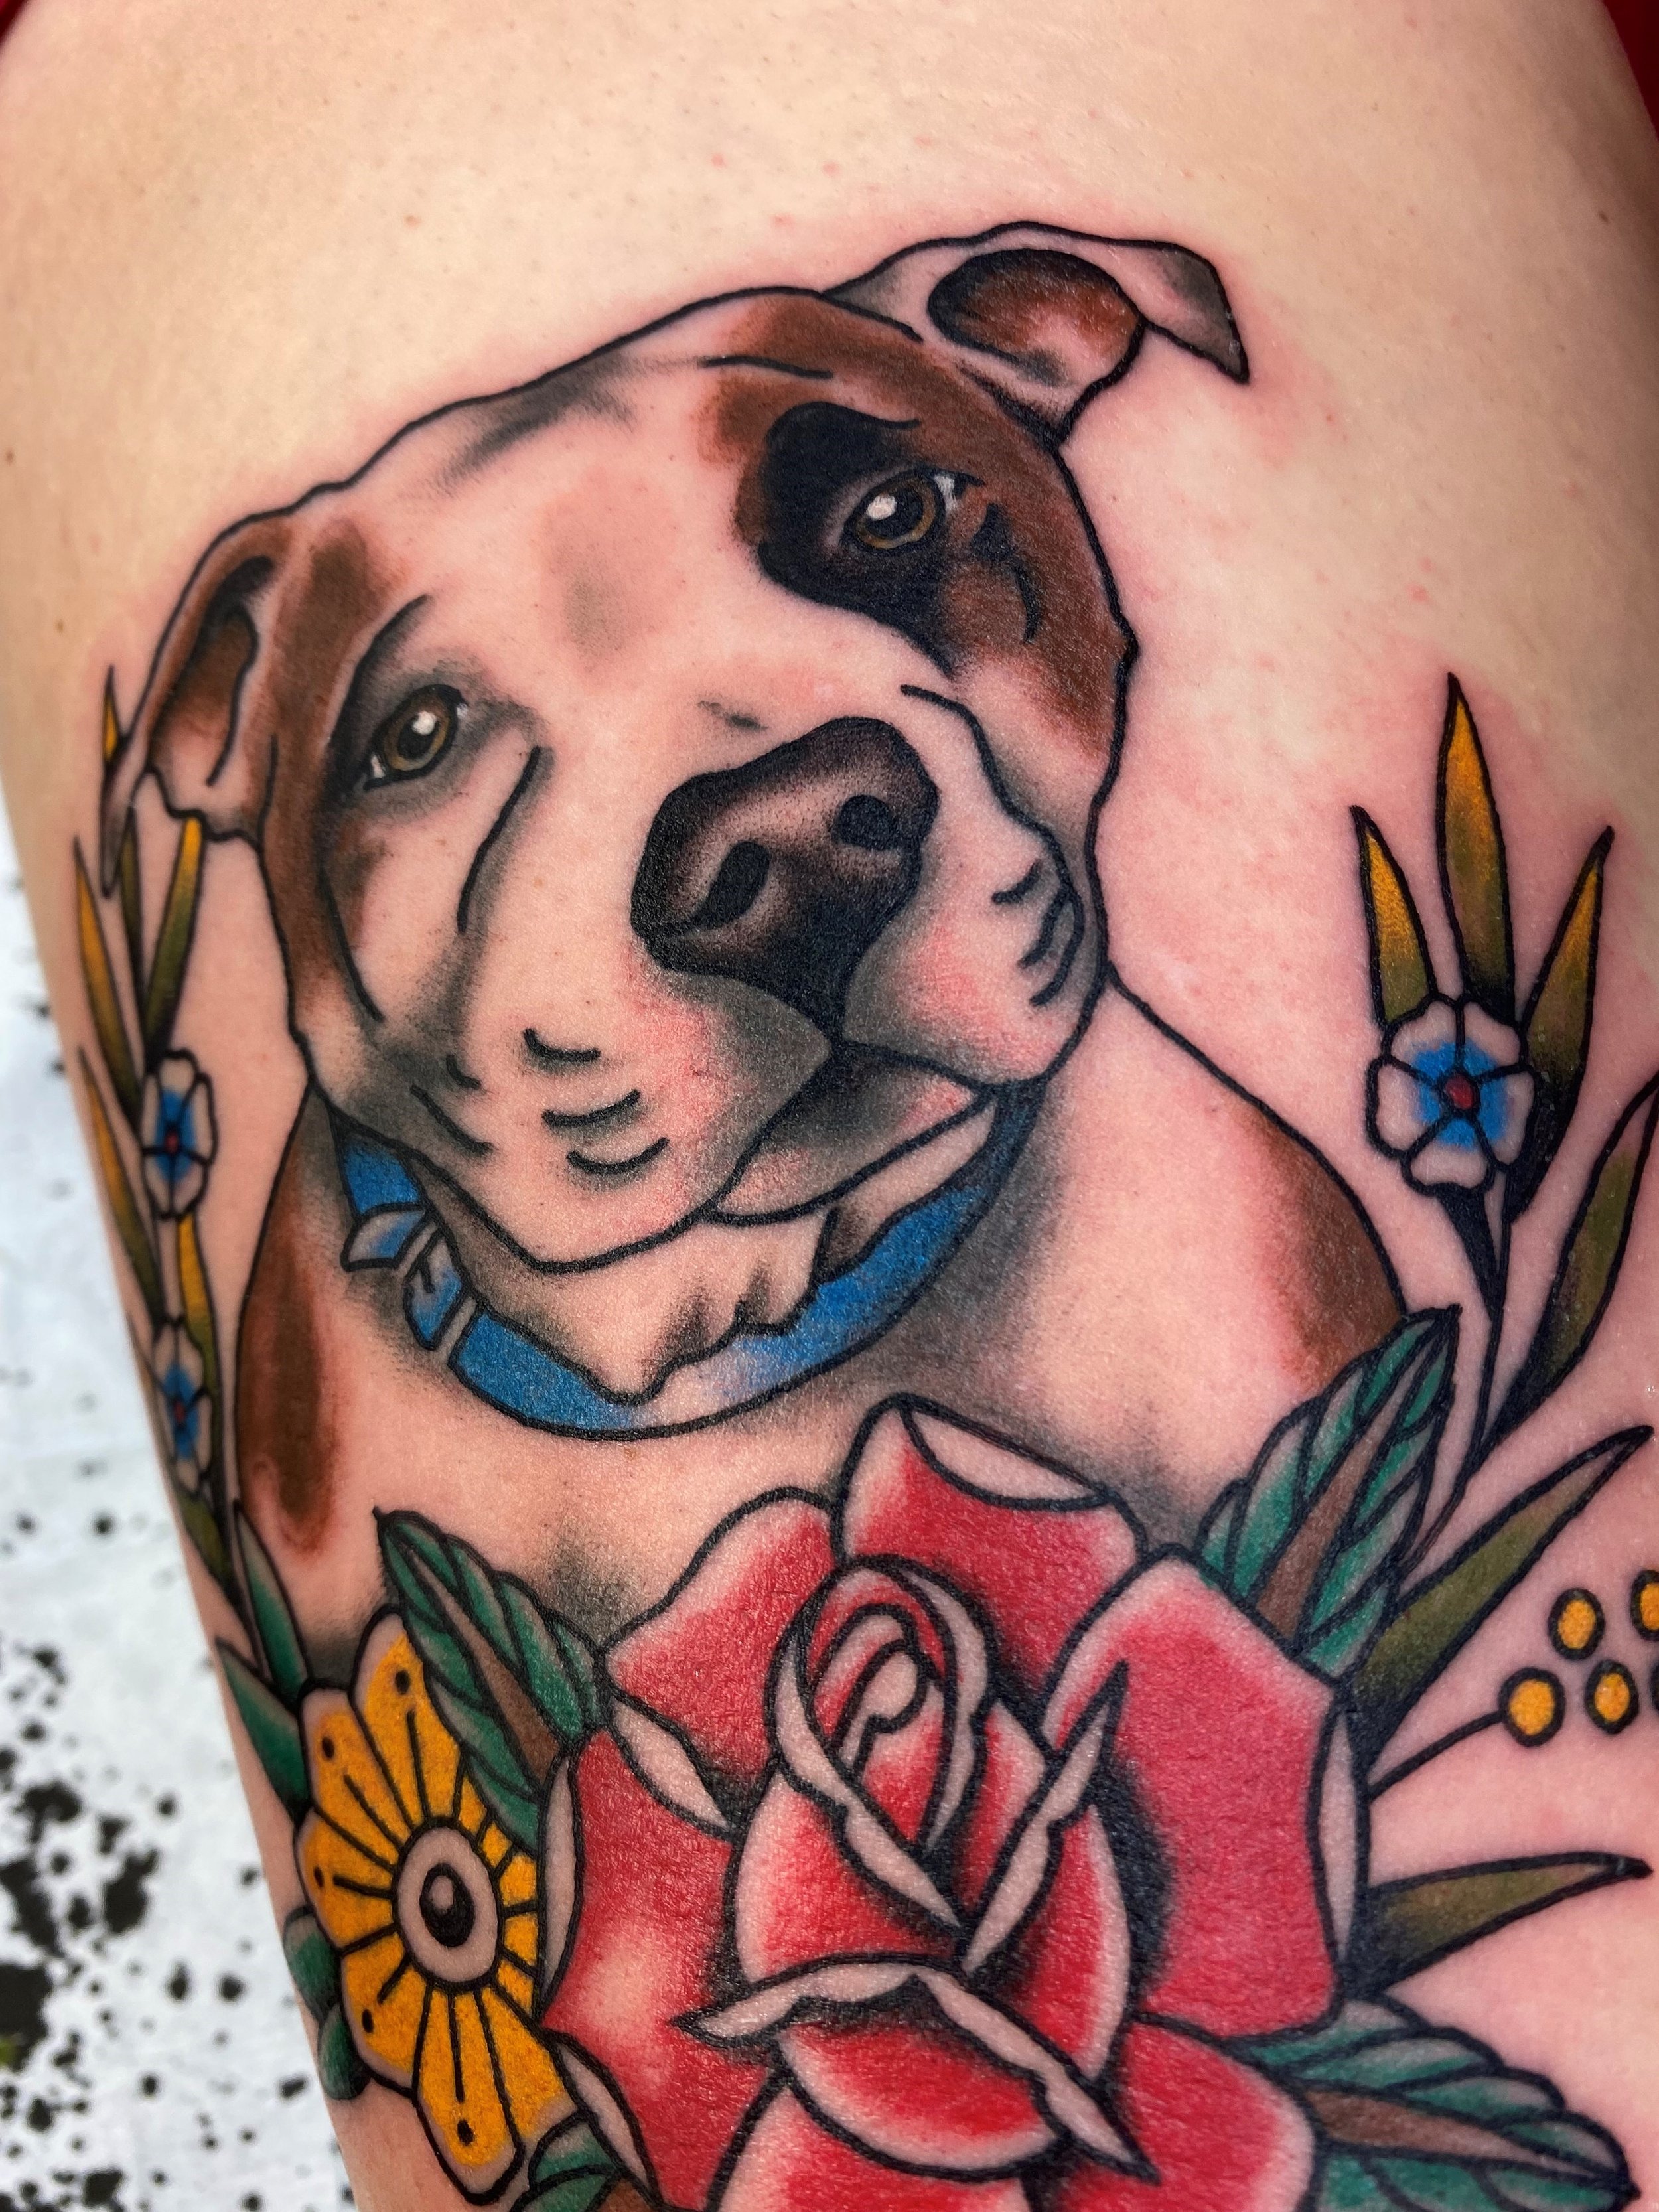 Pitbull portrait and flowers by Scott  Bully Breed Tattoo  Facebook